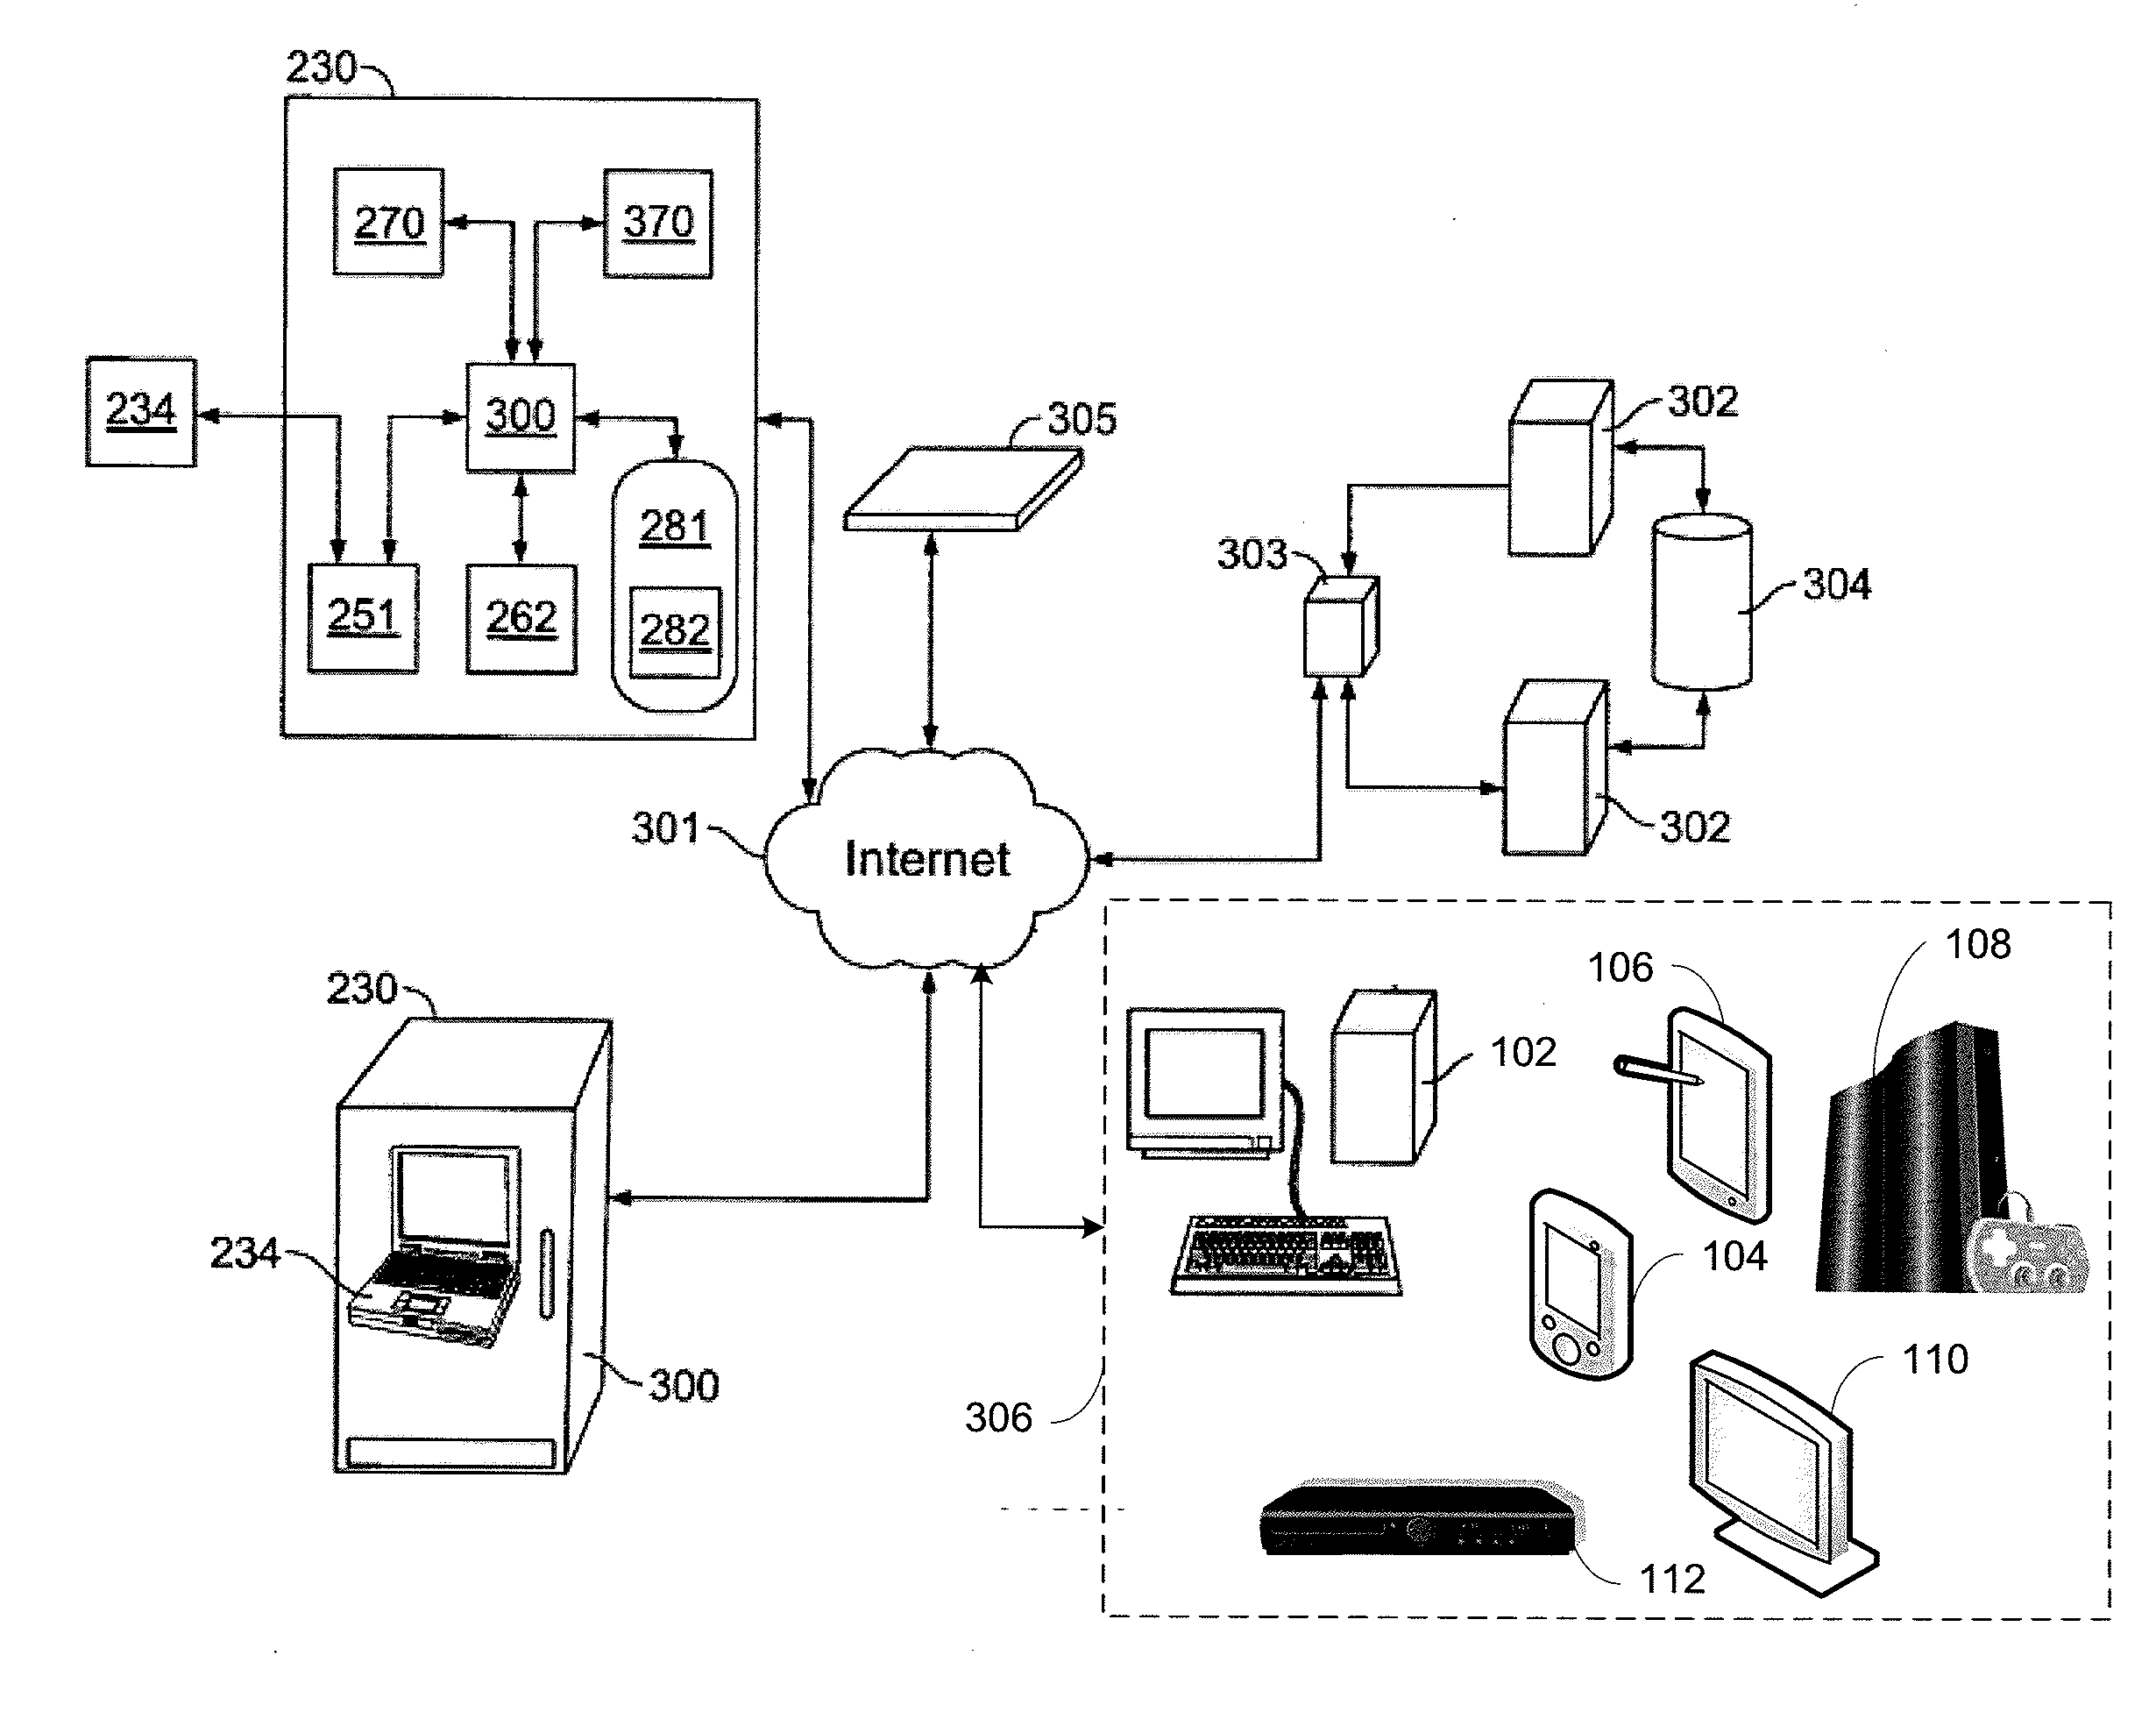 System and method for providing the identification of geographically closest article dispensing machines